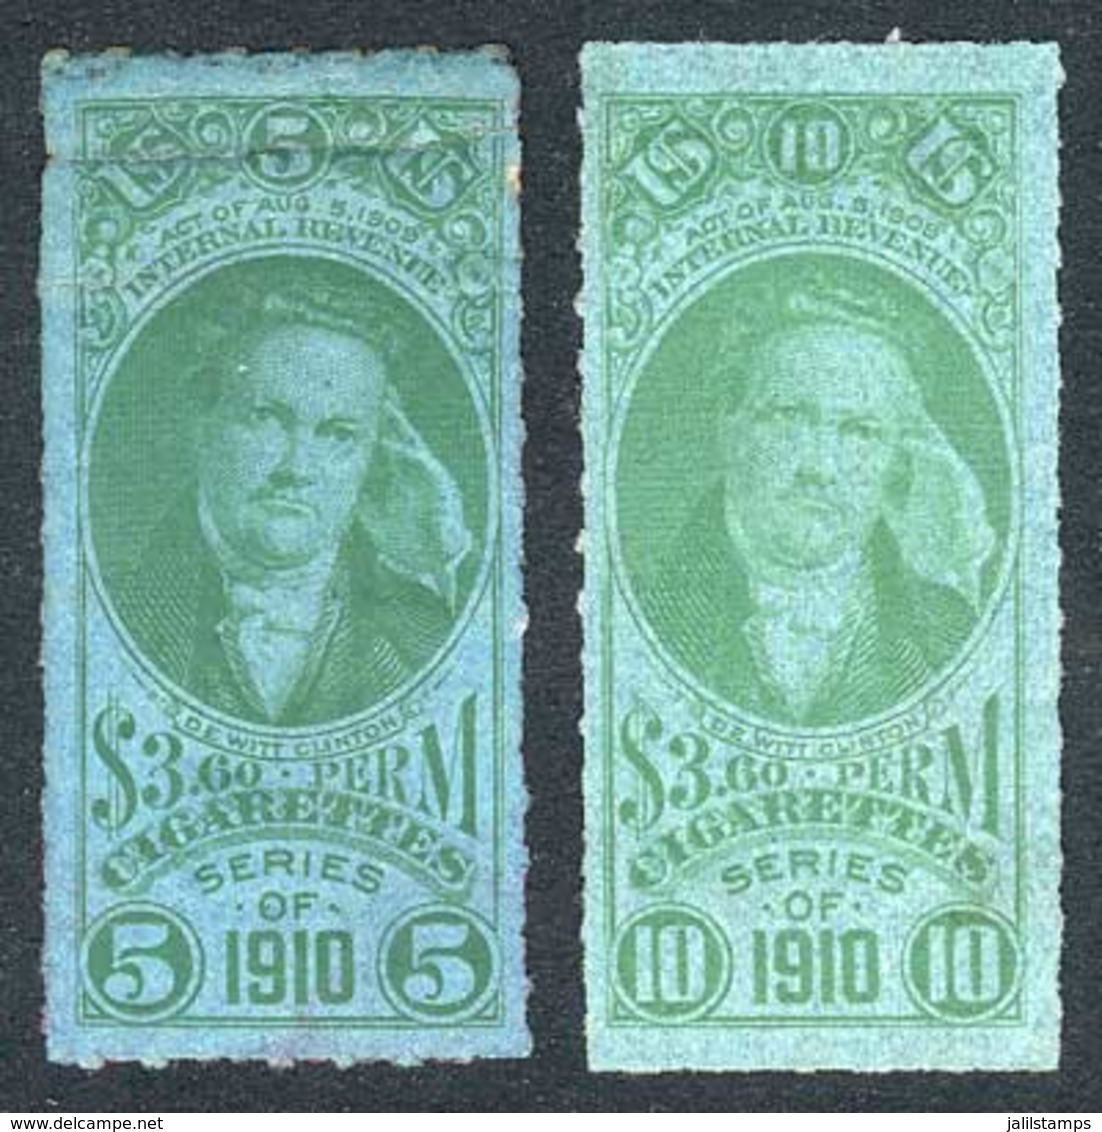 UNITED STATES: CIGARETTES: Year 1910, 2 Examples For 5 And 10 Printed In Green On Bluish Paper, Fine Quality! - Steuermarken